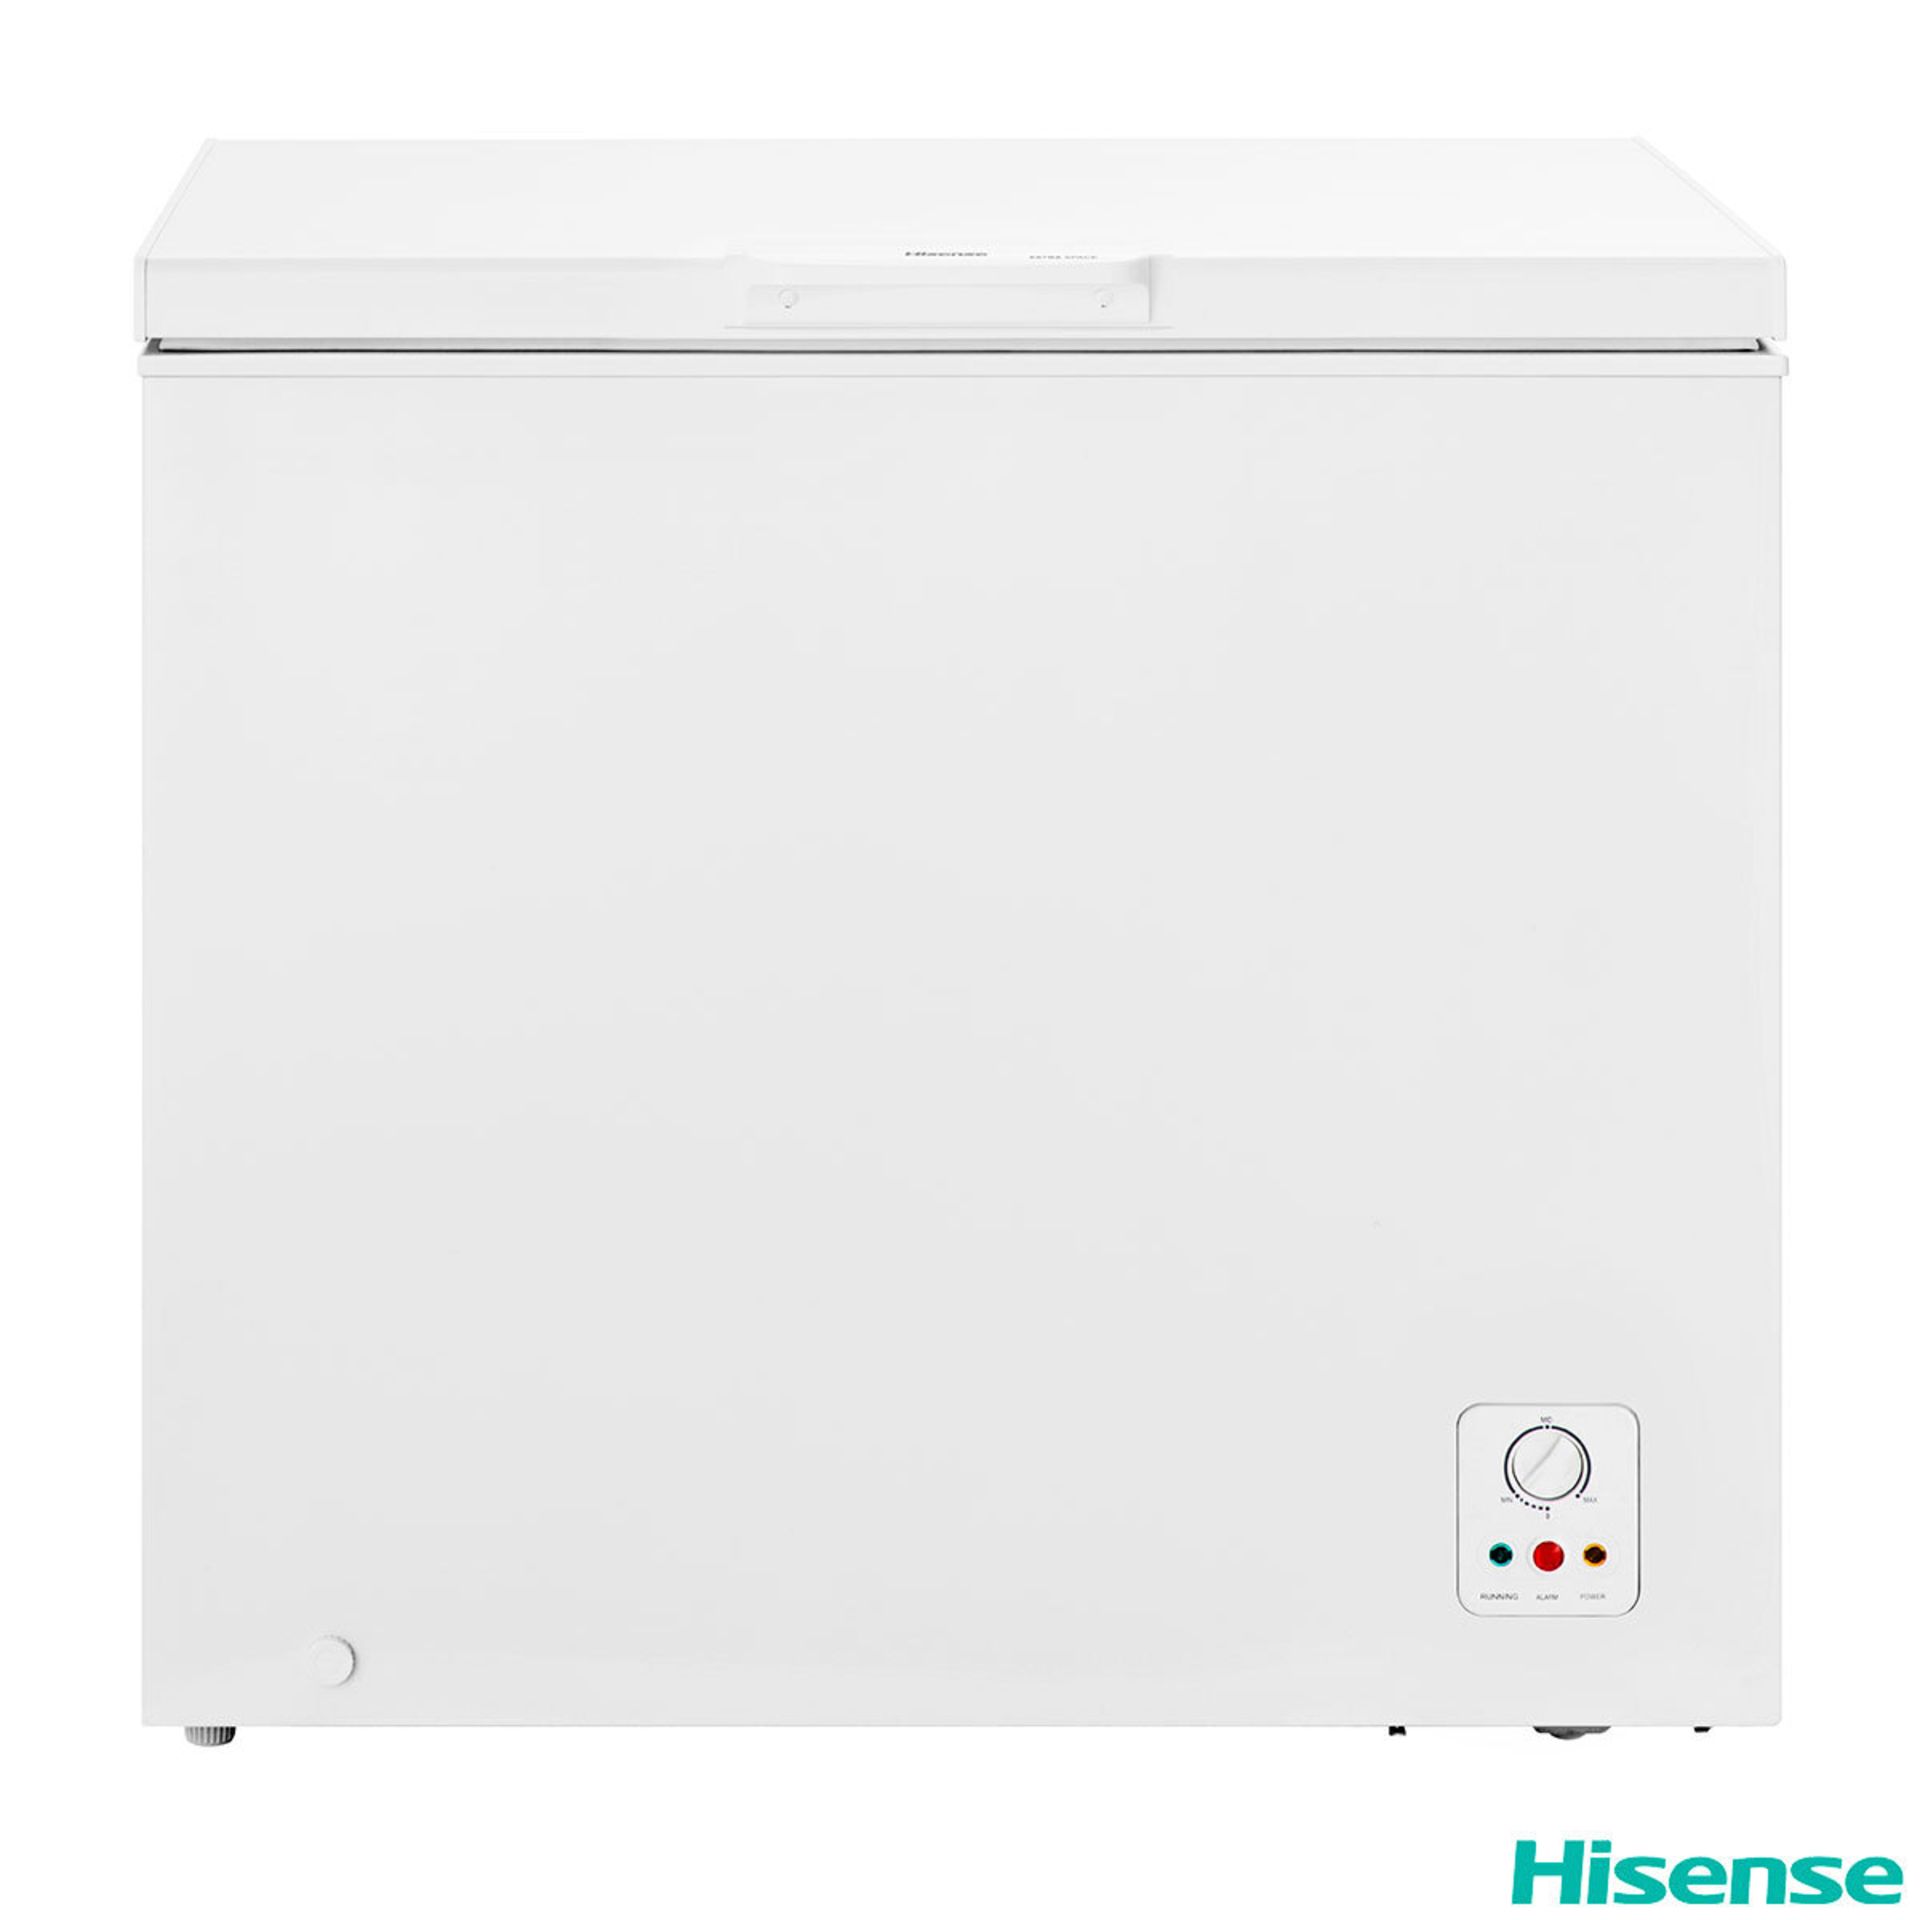 Hisense chest freezer, tested working and clean with handle